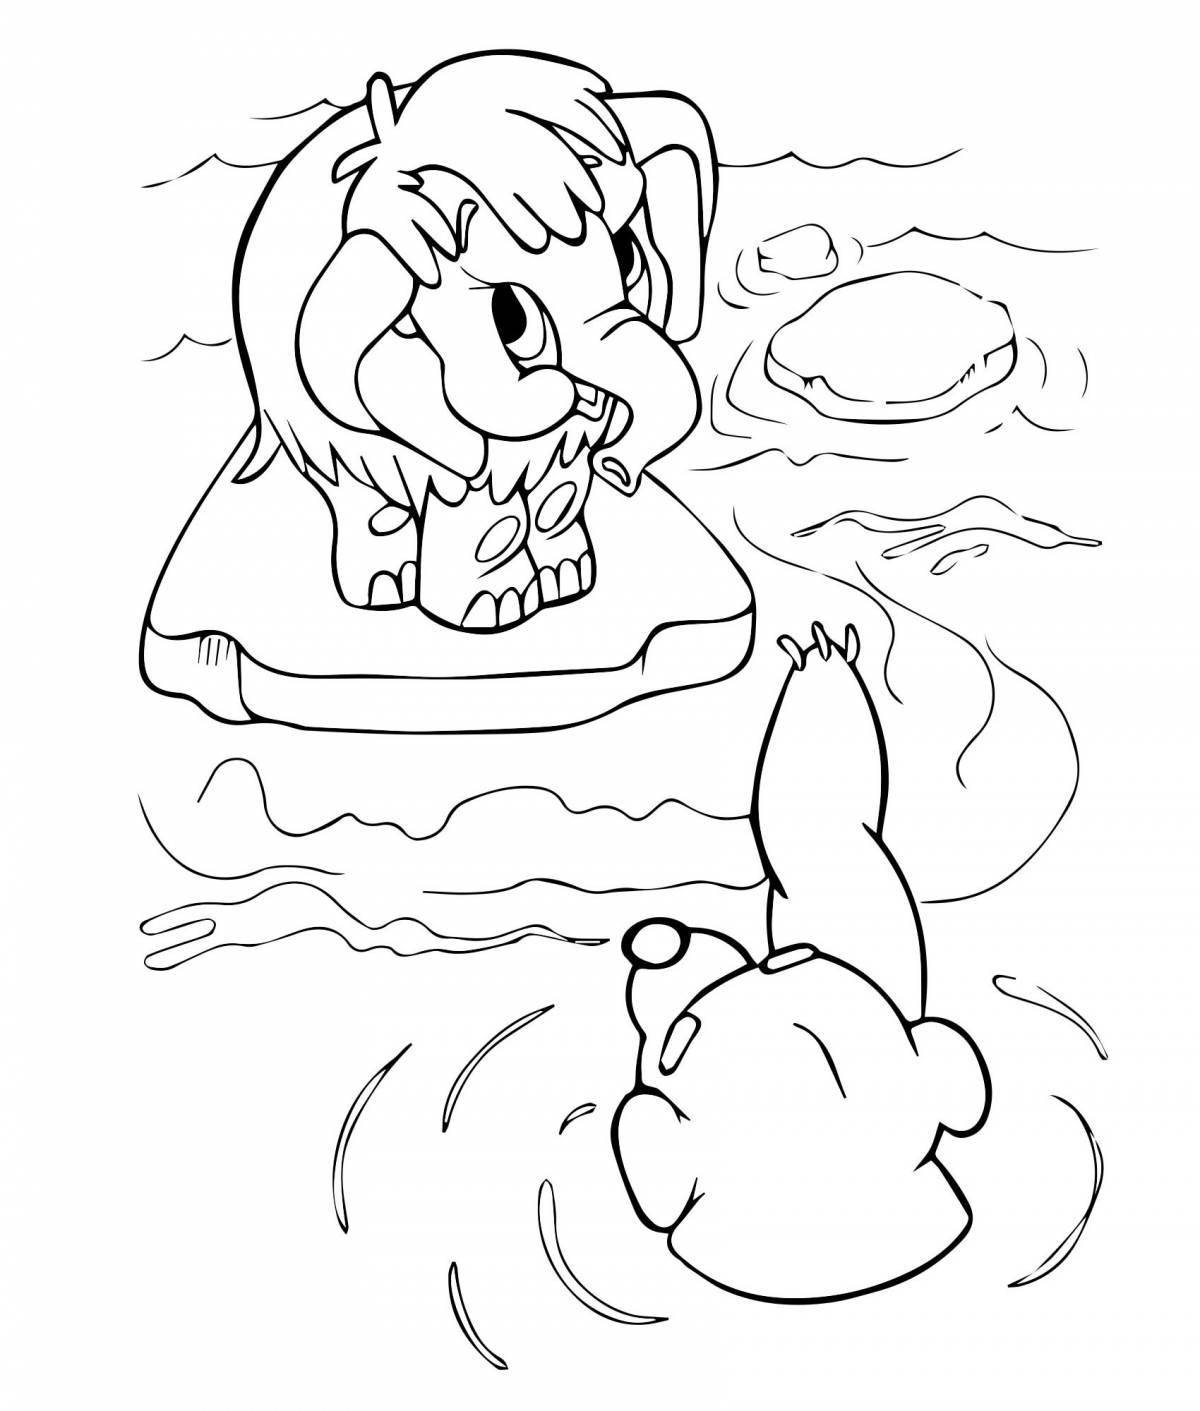 Coloring page gorgeous ice floe